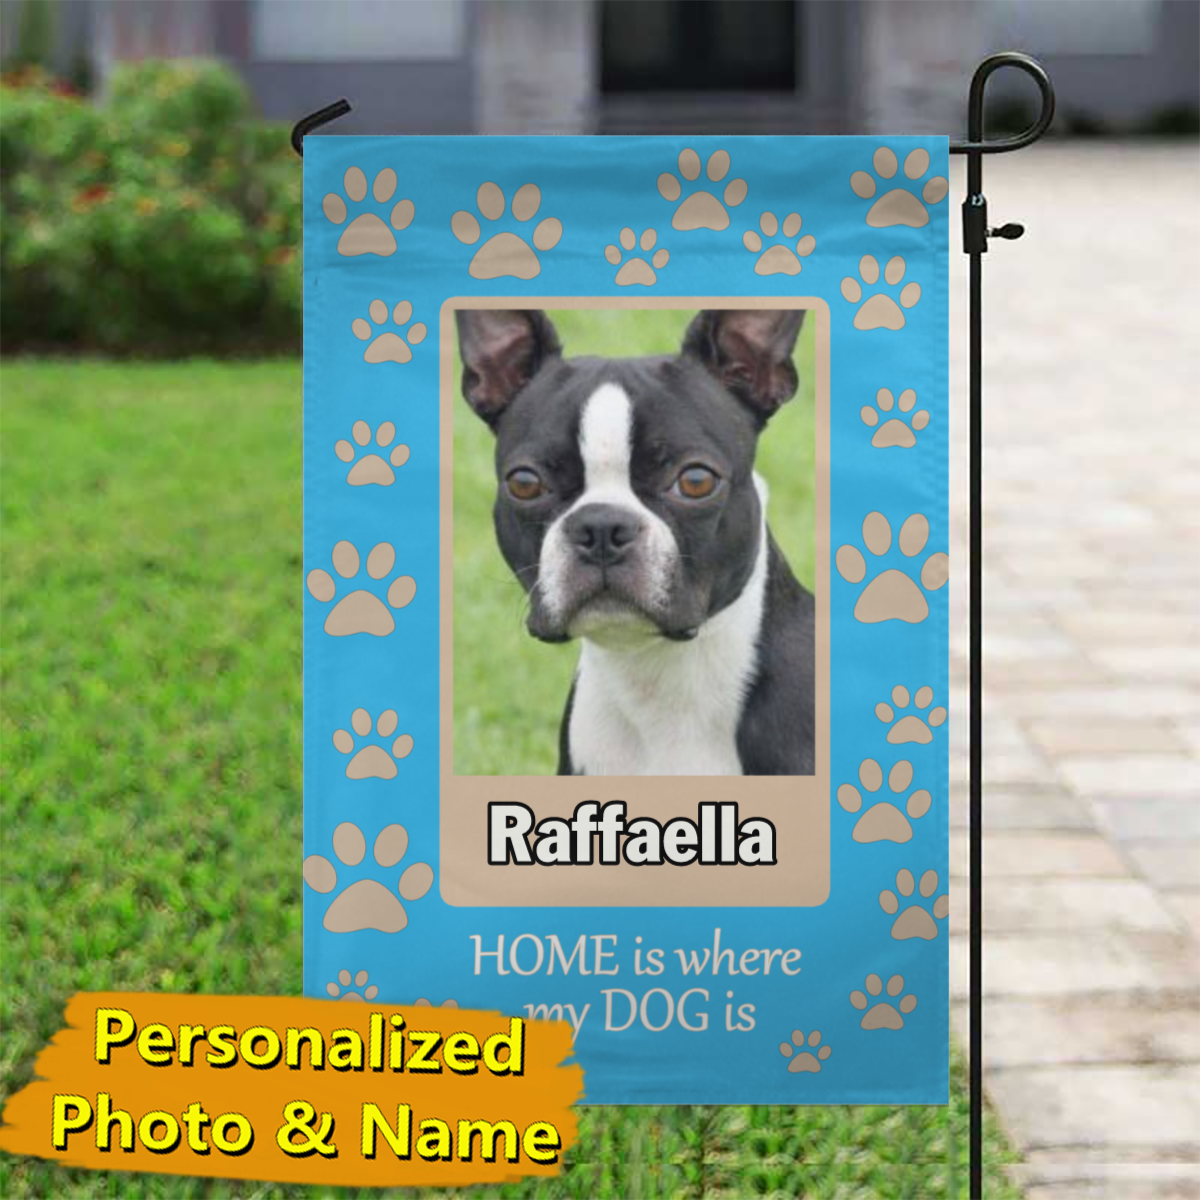 Home is Where My Dog is – Personalized Photo & Name – Garden Flag & House Flag